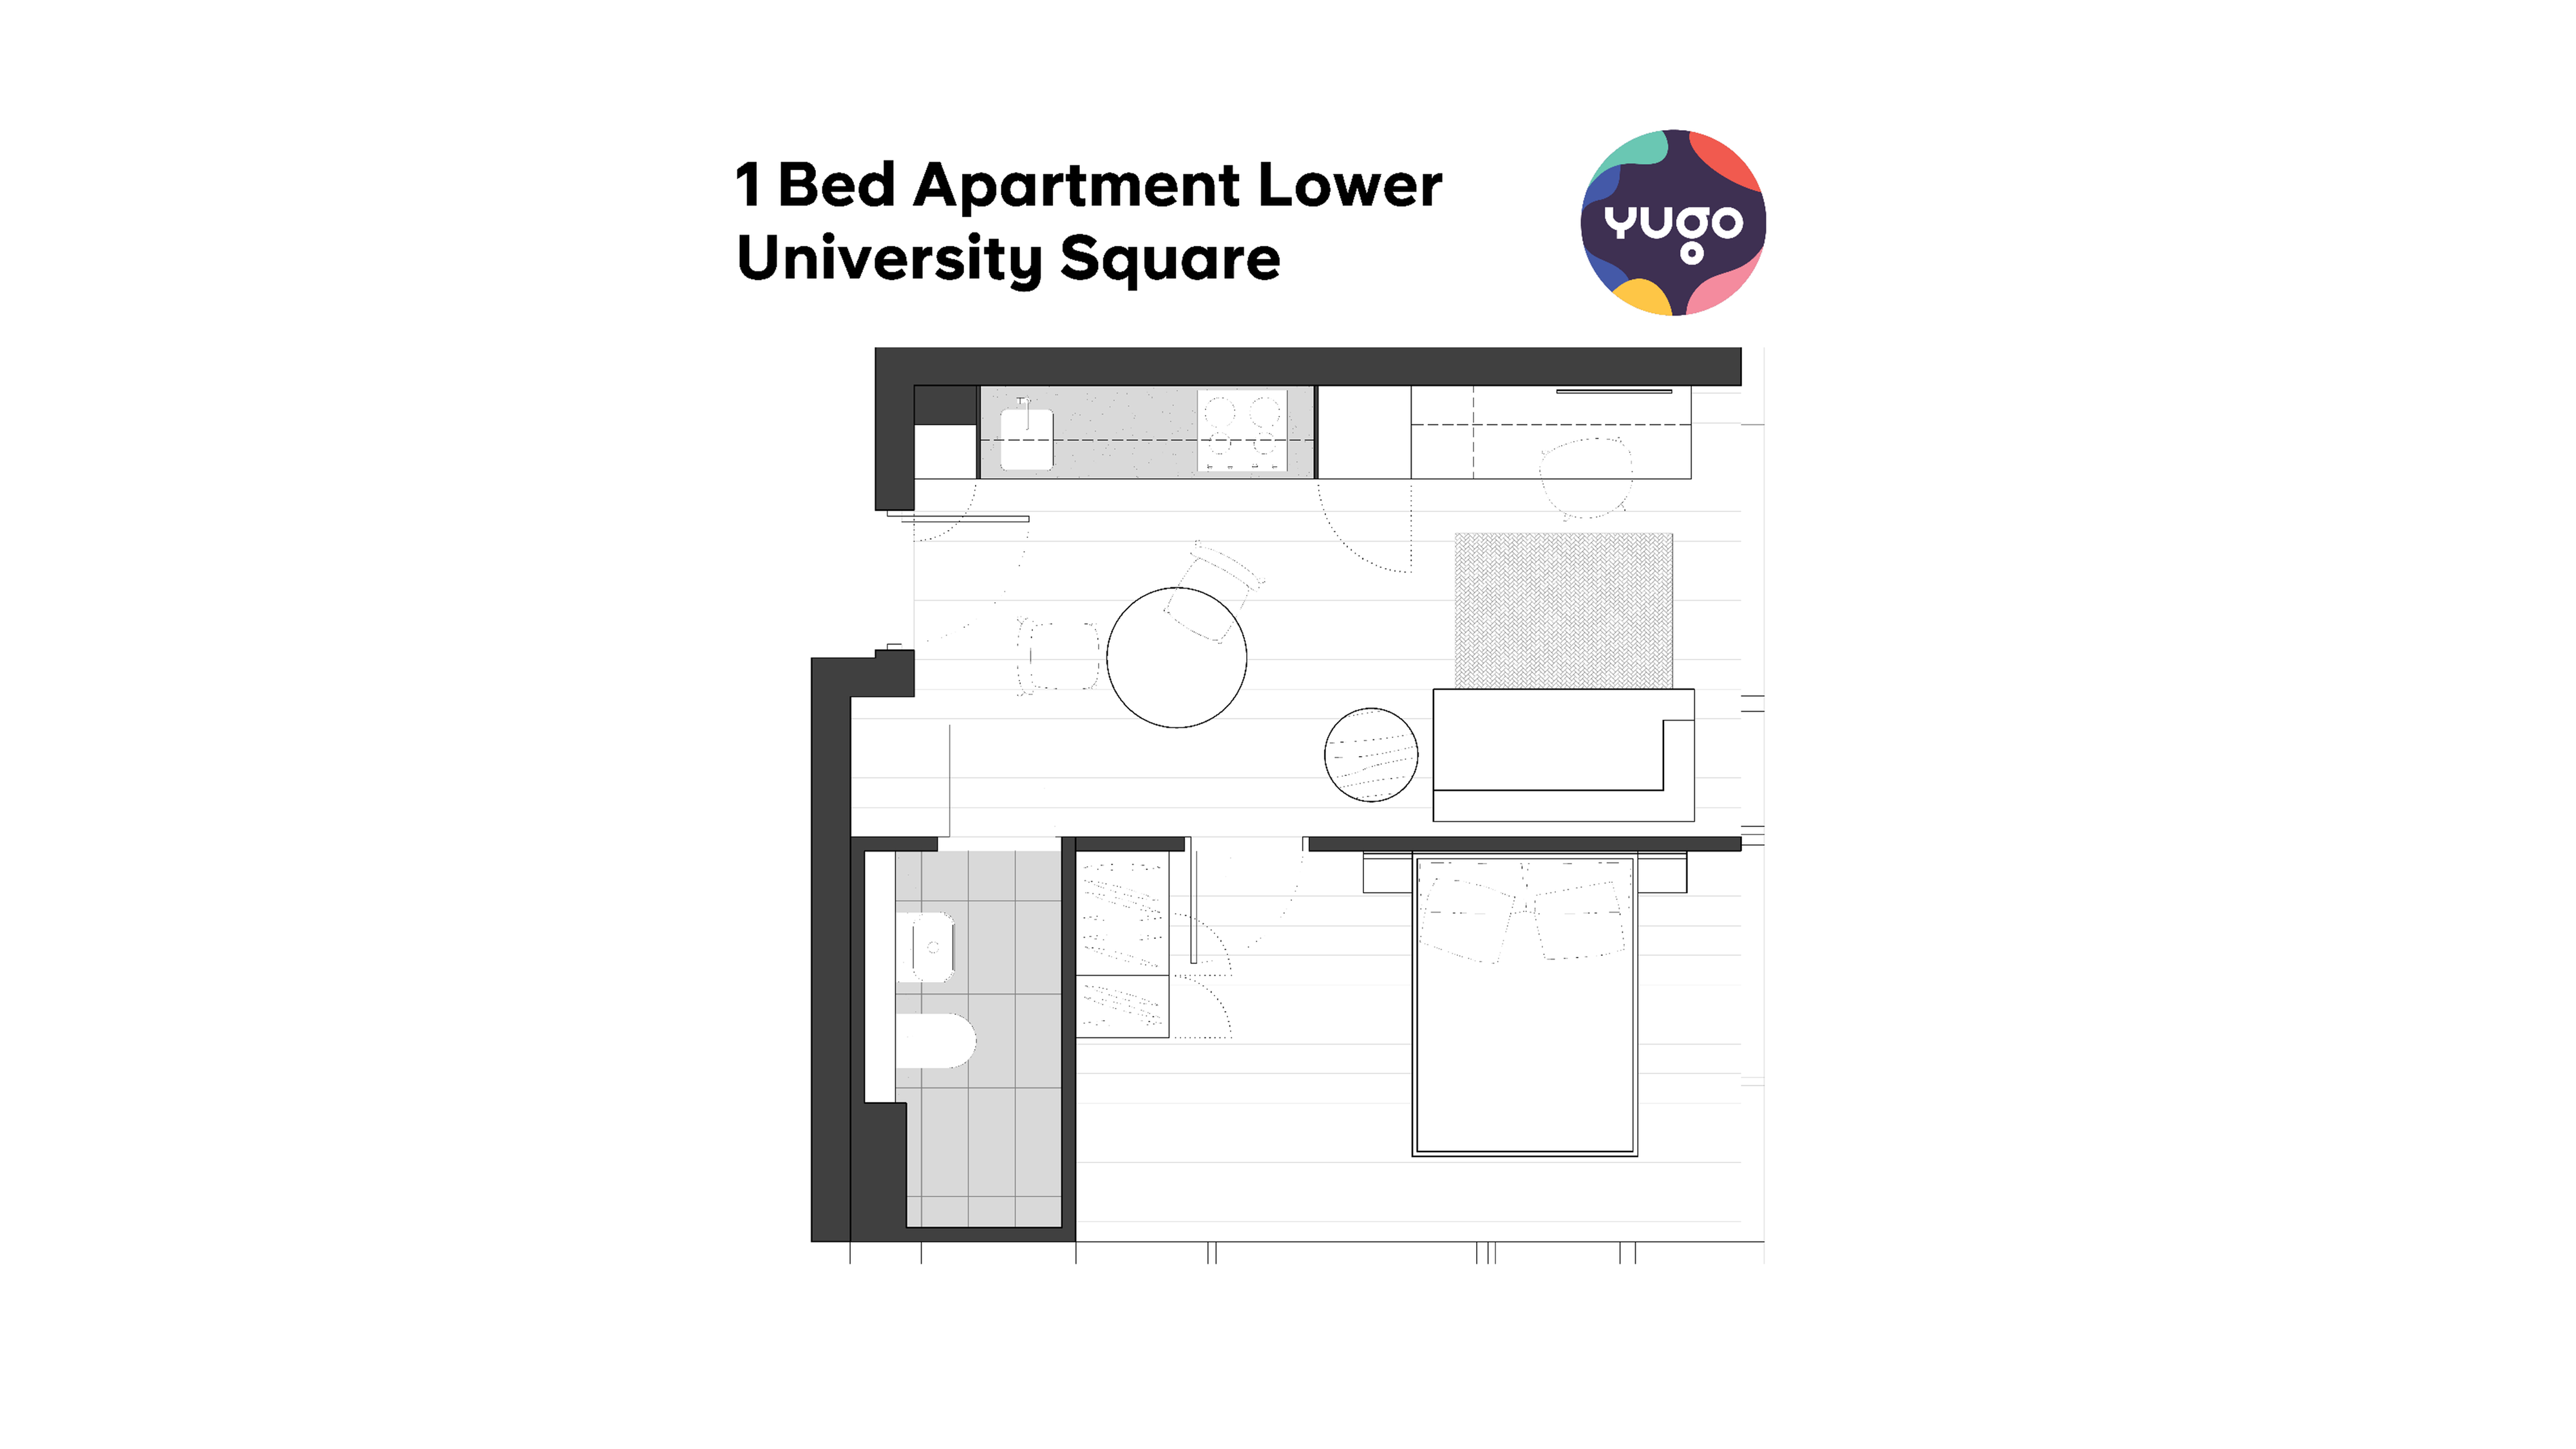 1 Bed Apartment Lower image